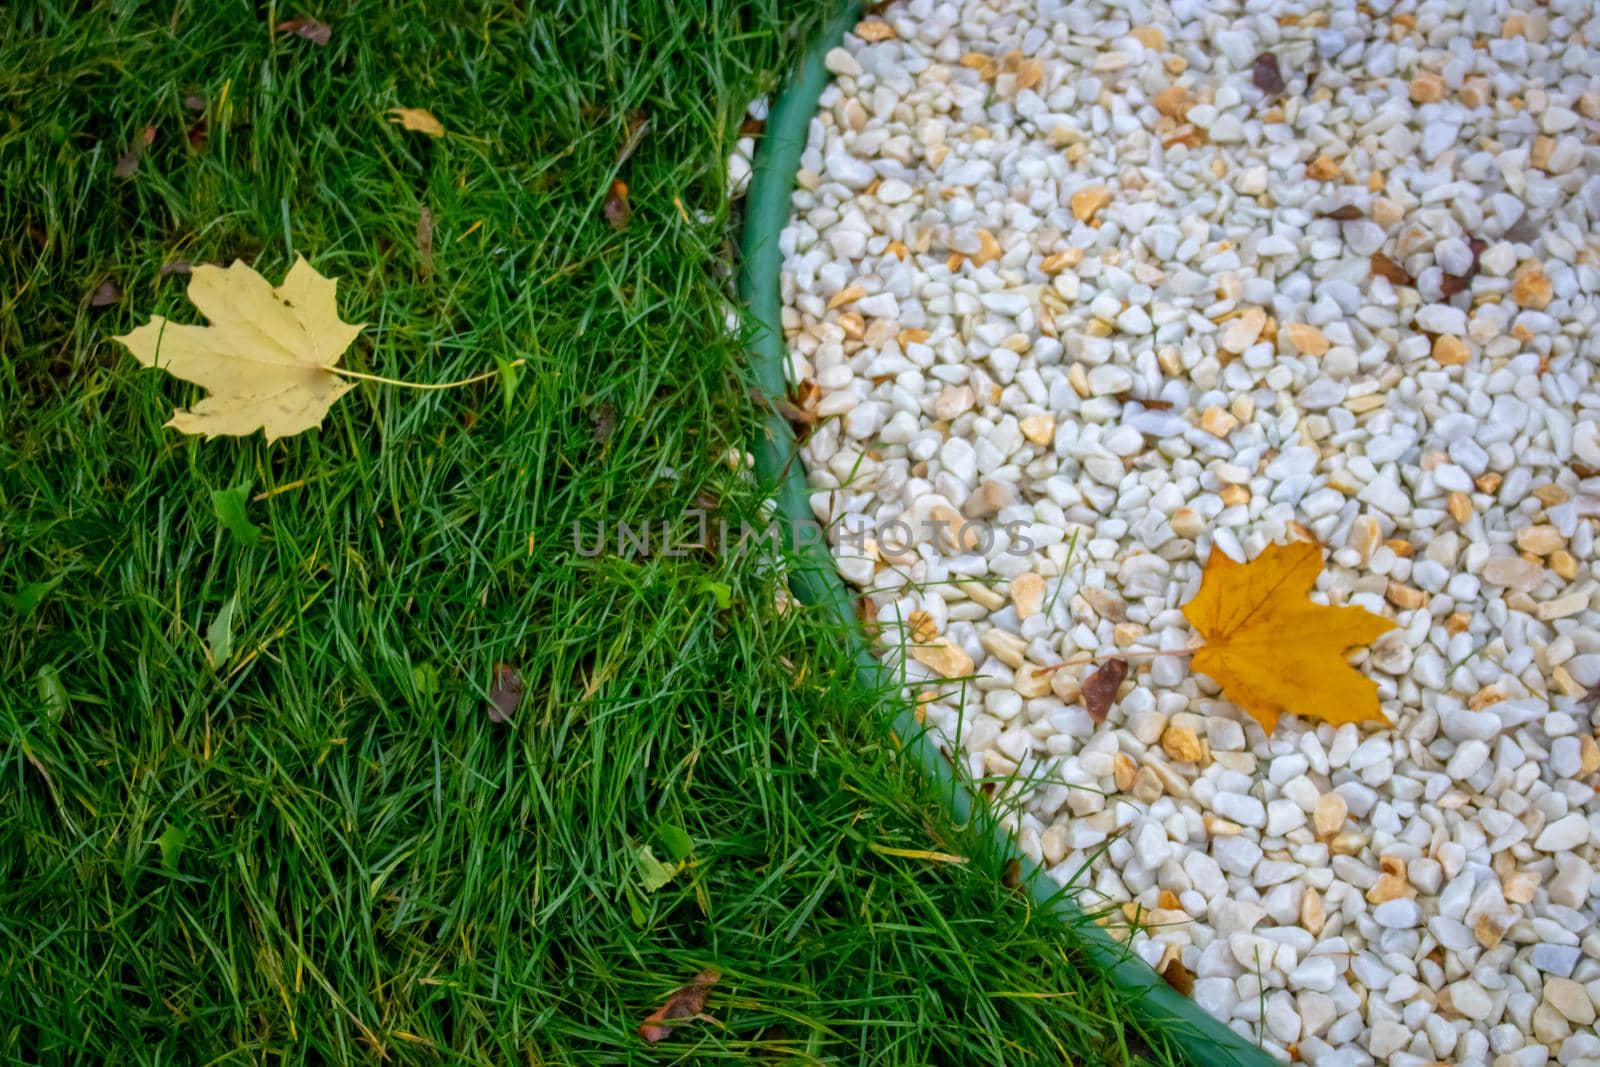 Paving stones covered with leaves and grass. Happy, golden autumn.